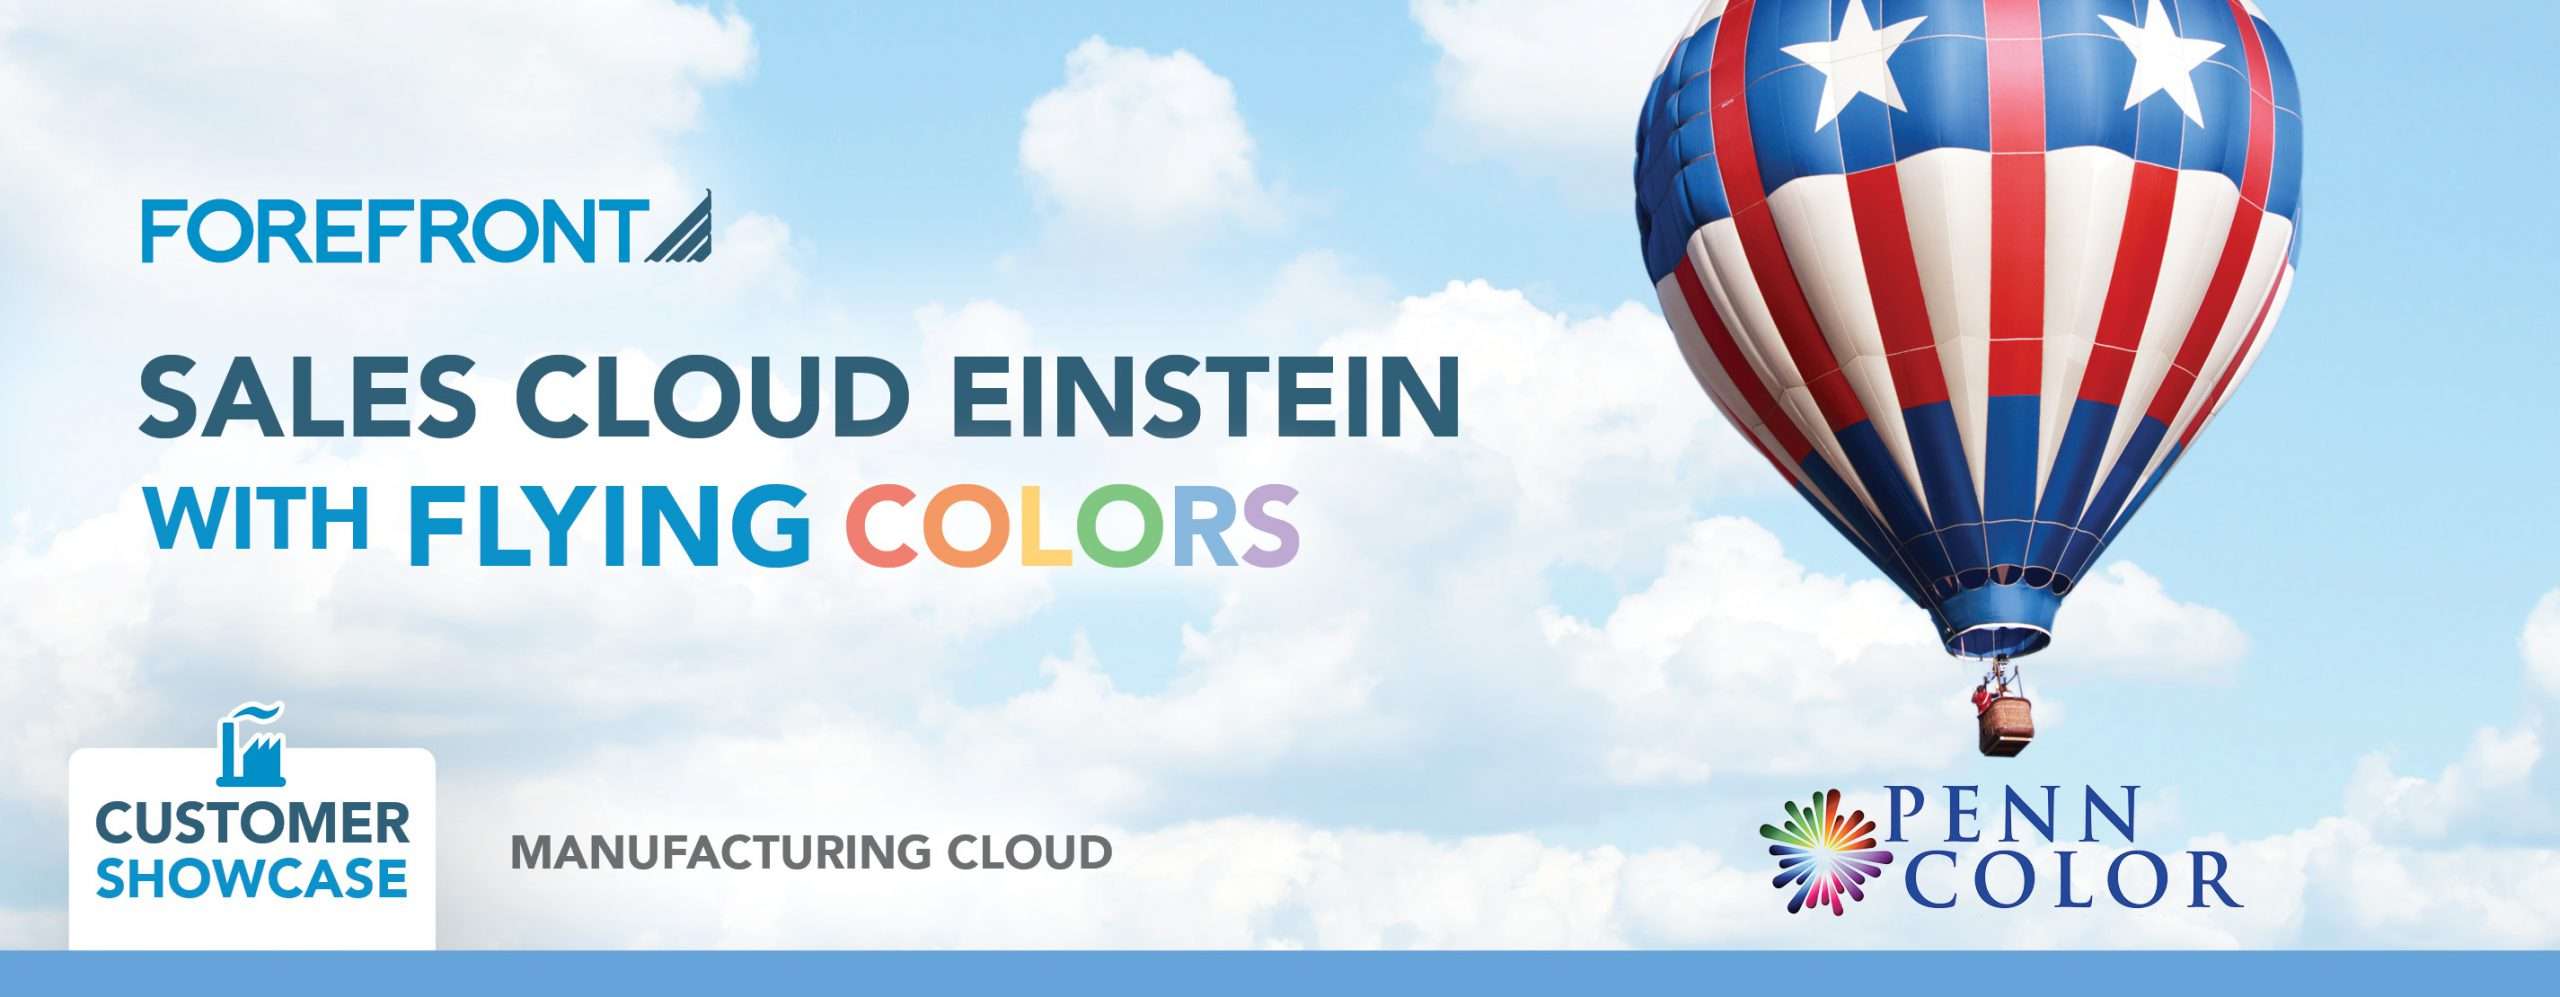 A colorful banner graphic with a colorful hot air balloon on one side, and the text "ForeFront, Sales Cloud Einstein with Flying Colors"